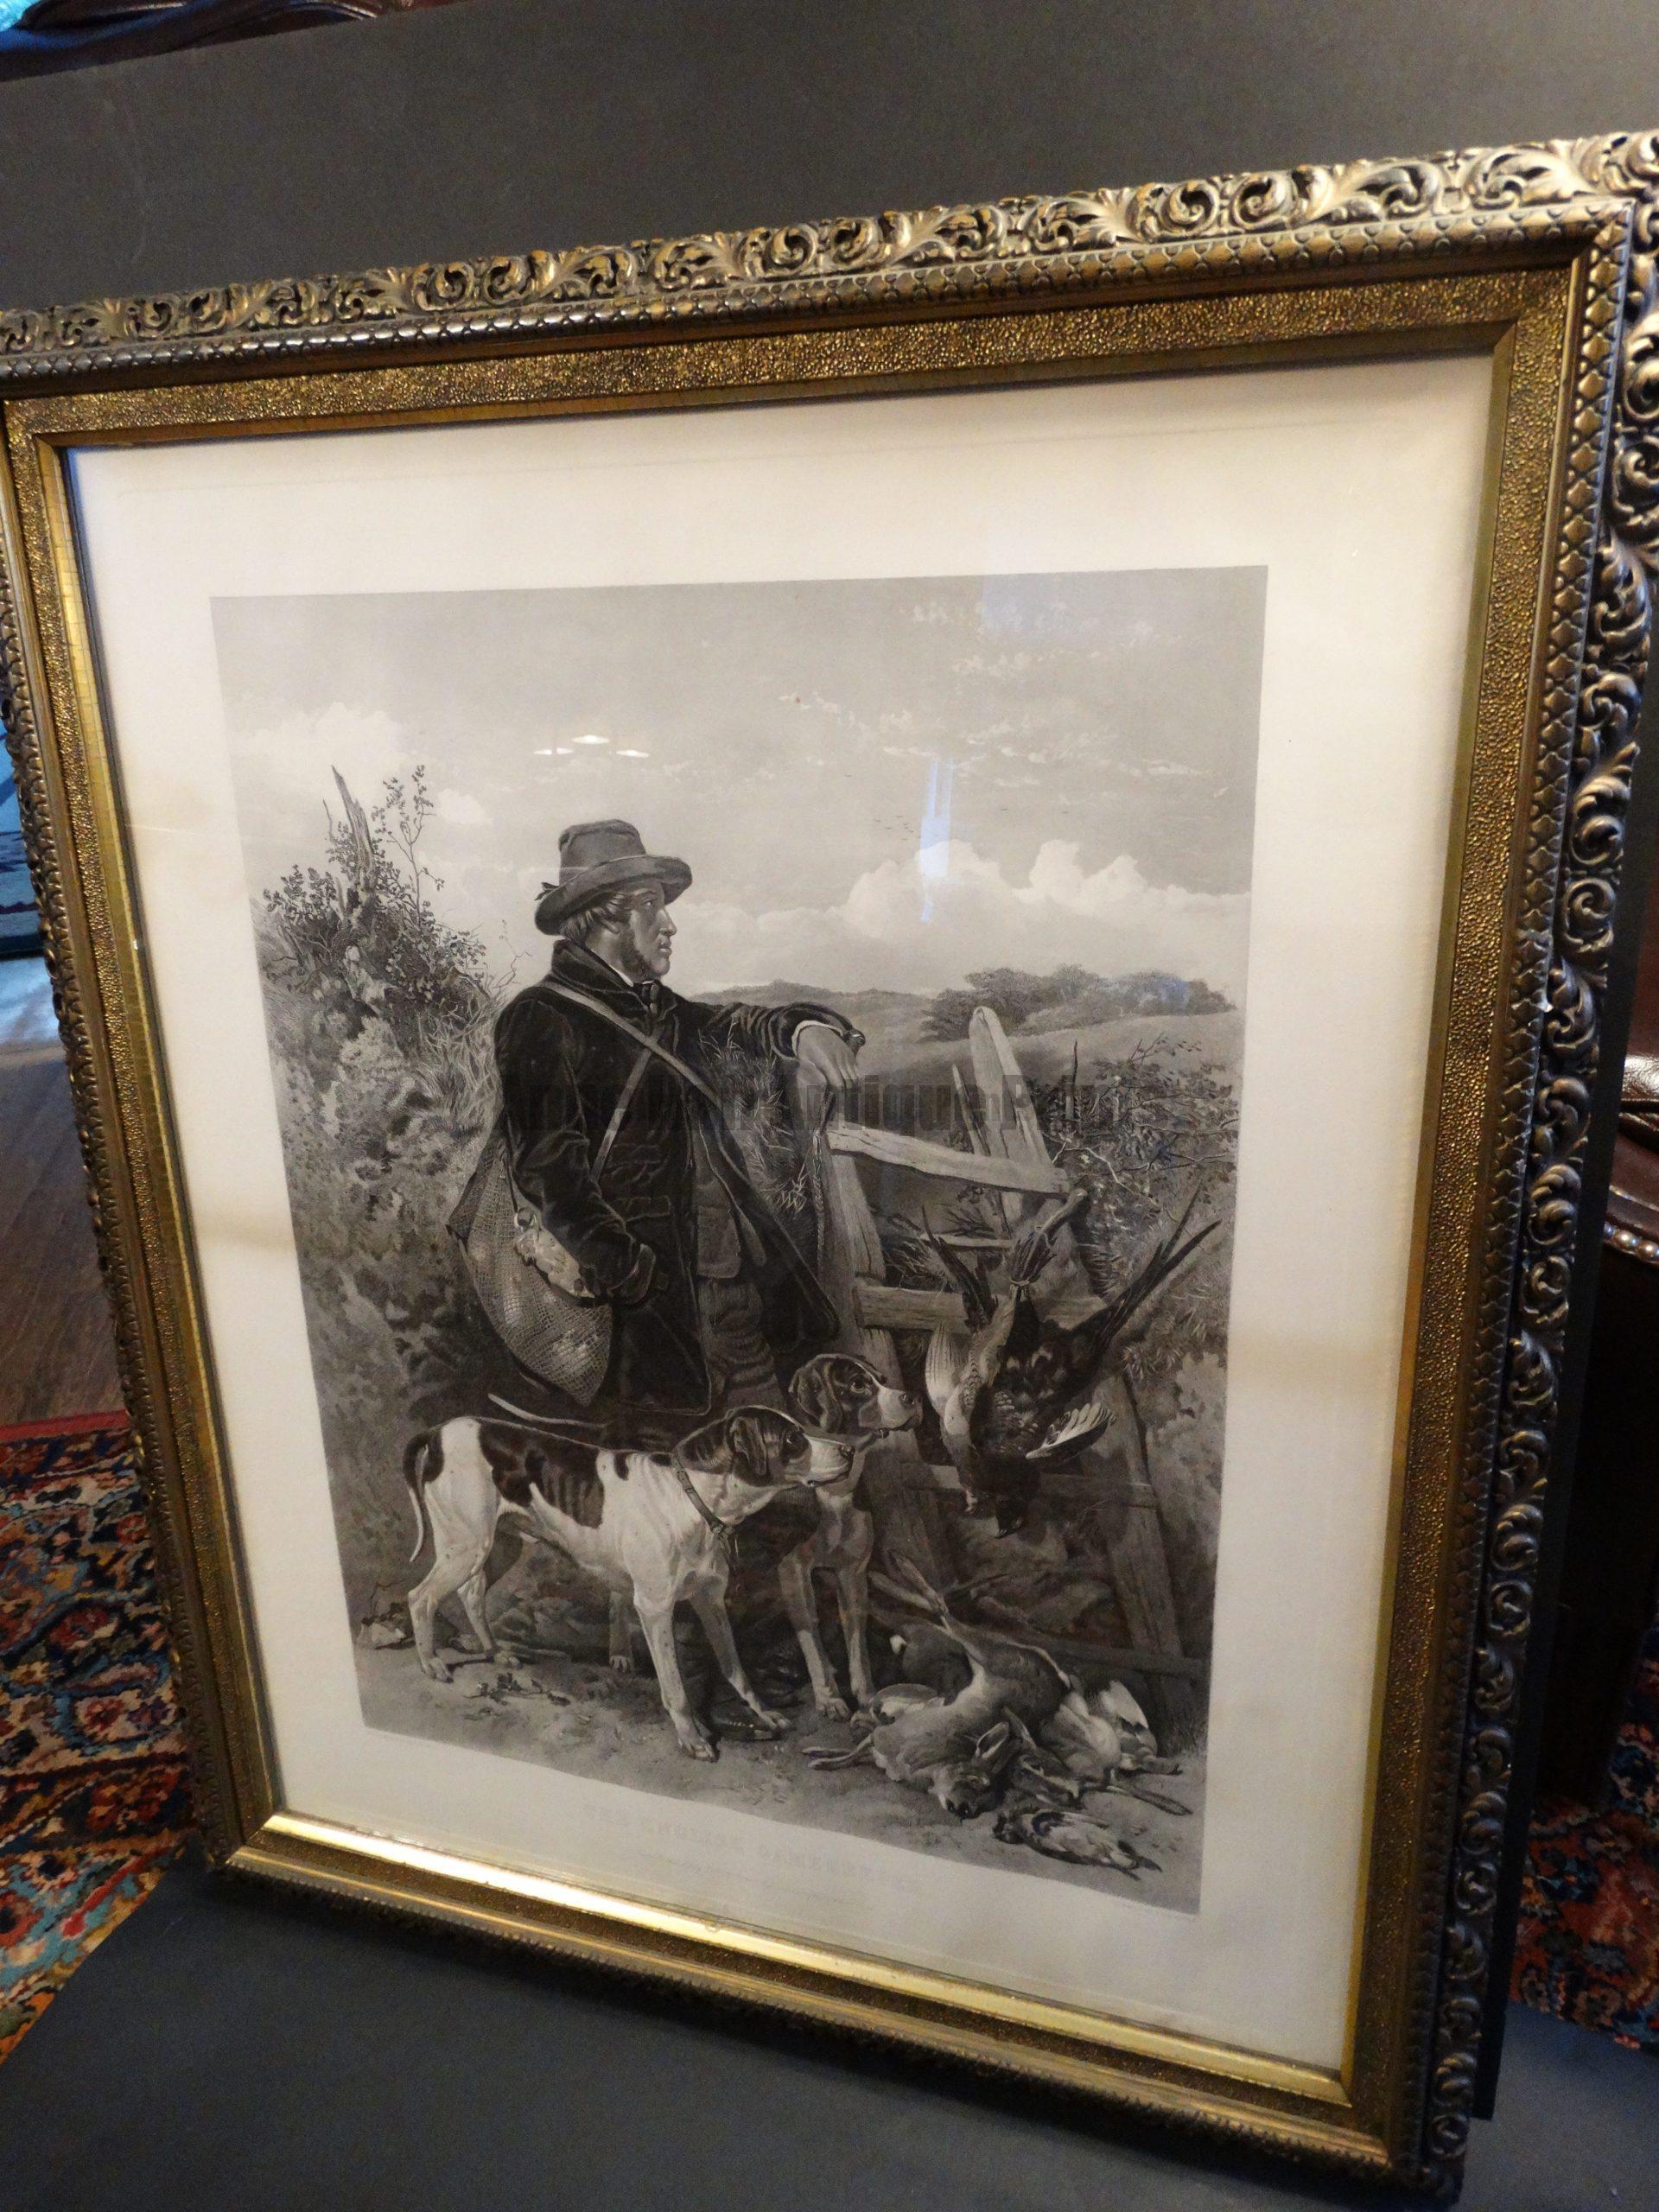 The English Game-Keeper.  Steel plate engraving, painted by Richard Ansdellara, Engraved by F. Stackpoole. Framed, 30.5" x 37" Sold with the Scotch Game Keeper as a pair.  